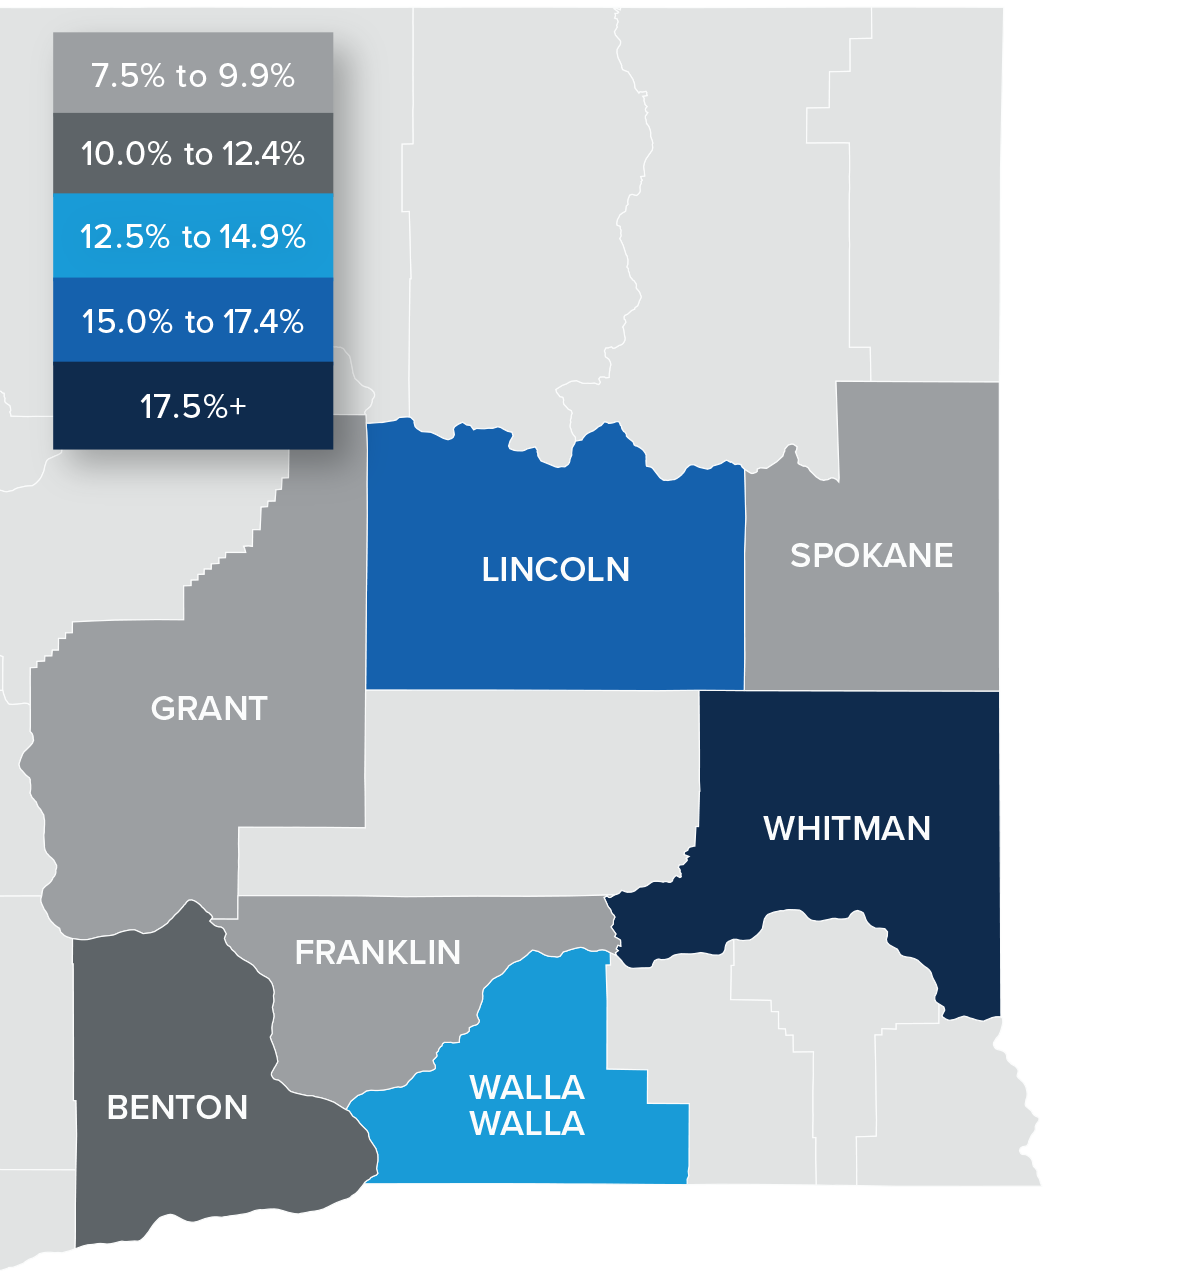 A map showing the real estate home prices percentage changes for various counties in Eastern Washington. Different colors correspond to different tiers of percentage change. Grant, Franklin, and Spokane County have a percentage change in the 7.5% to 9.9% range. Benton is in the 10% to 12.4% change range, Walla Walla is in the 12.5% to 14.9% range, Lincoln is in the 15% to 17.4% range, and Whitman is in the 17.5%+ range.